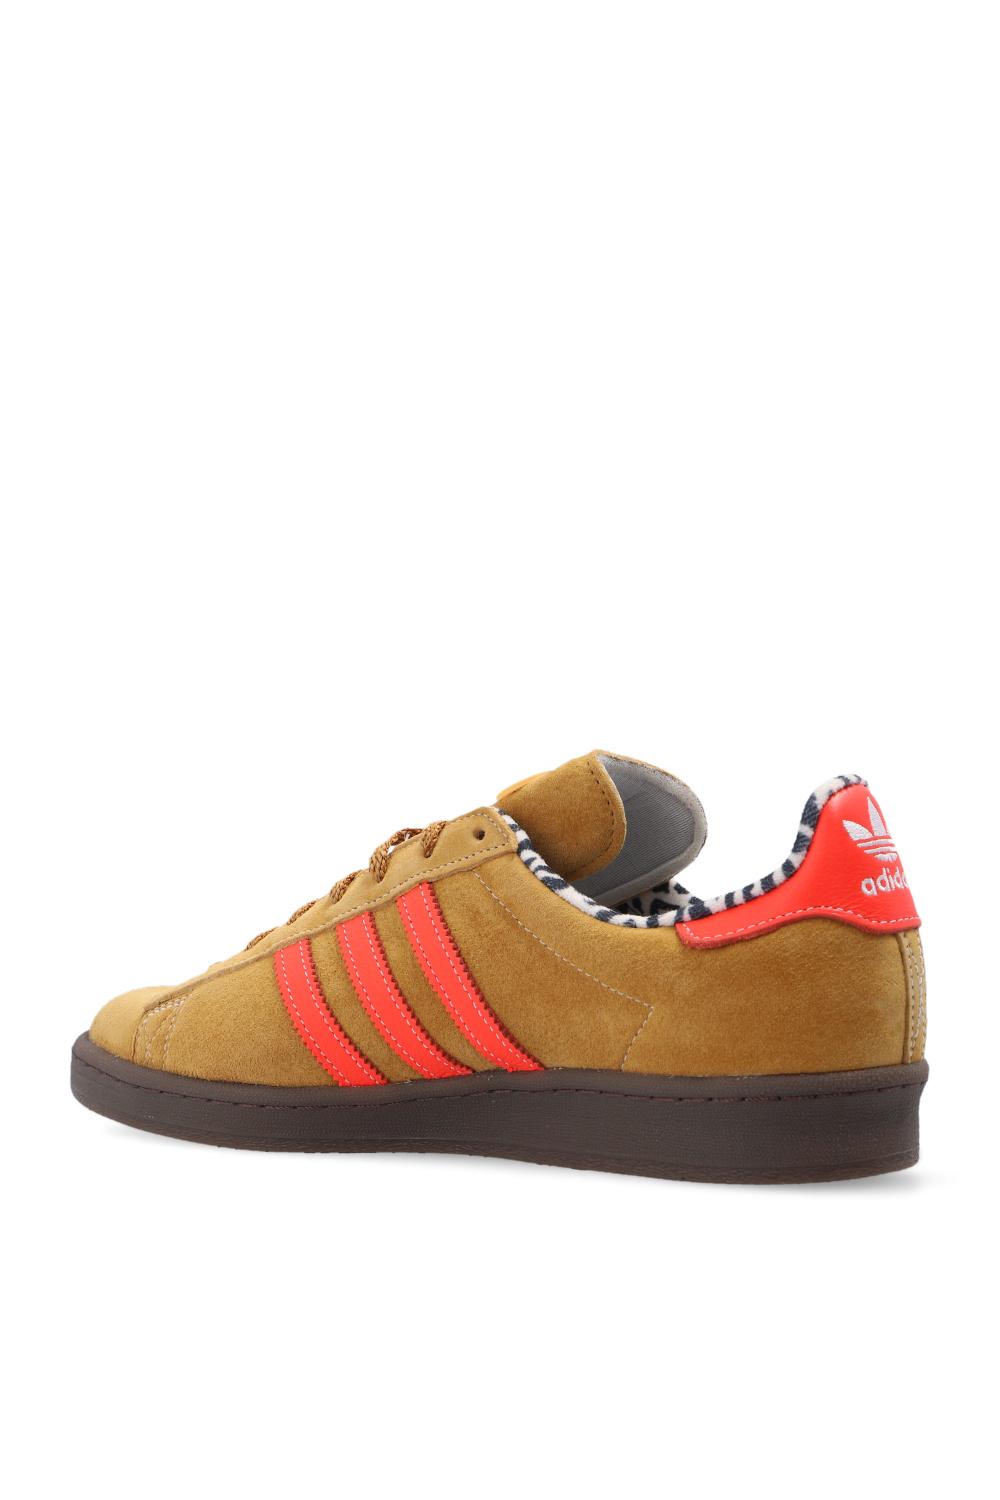 adidas Originals Leather 'campus 80 Xlarge' Sneakers in Brown for Men | Lyst